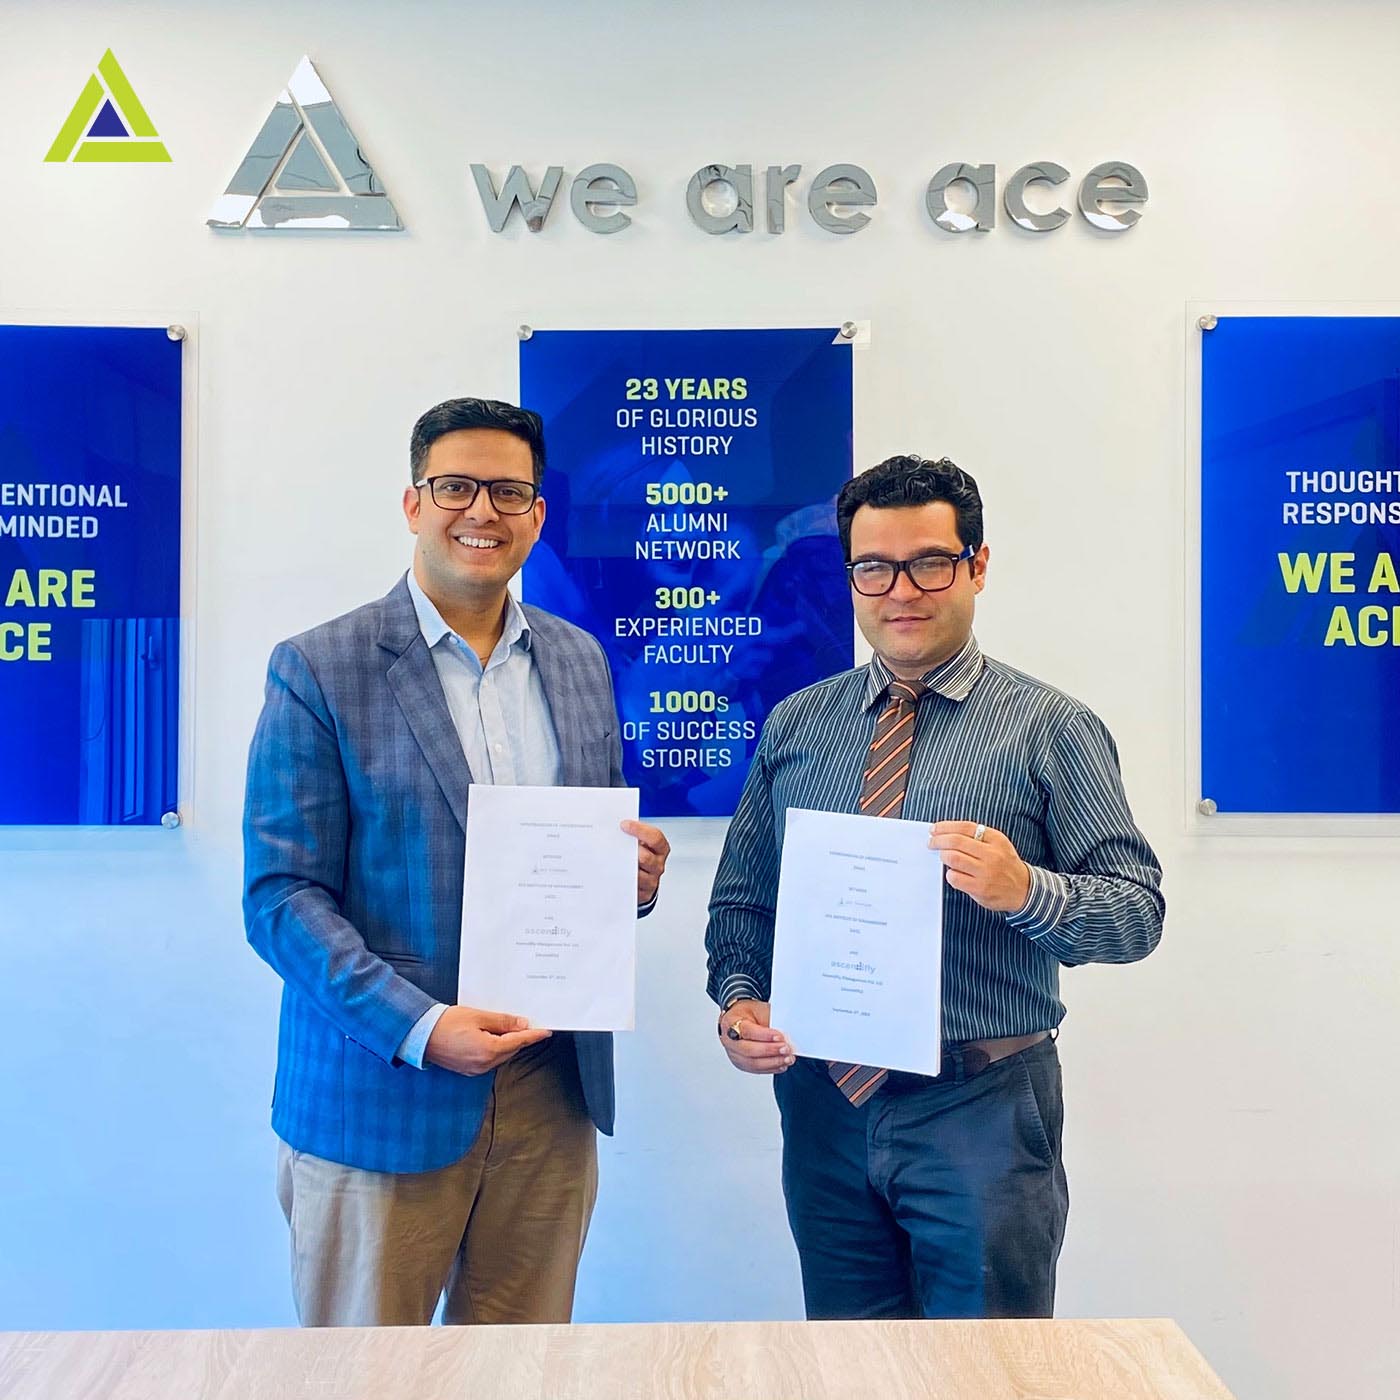 MoU was signed between Ace Institute of Management and Ascendifly Management Pvt. Ltd